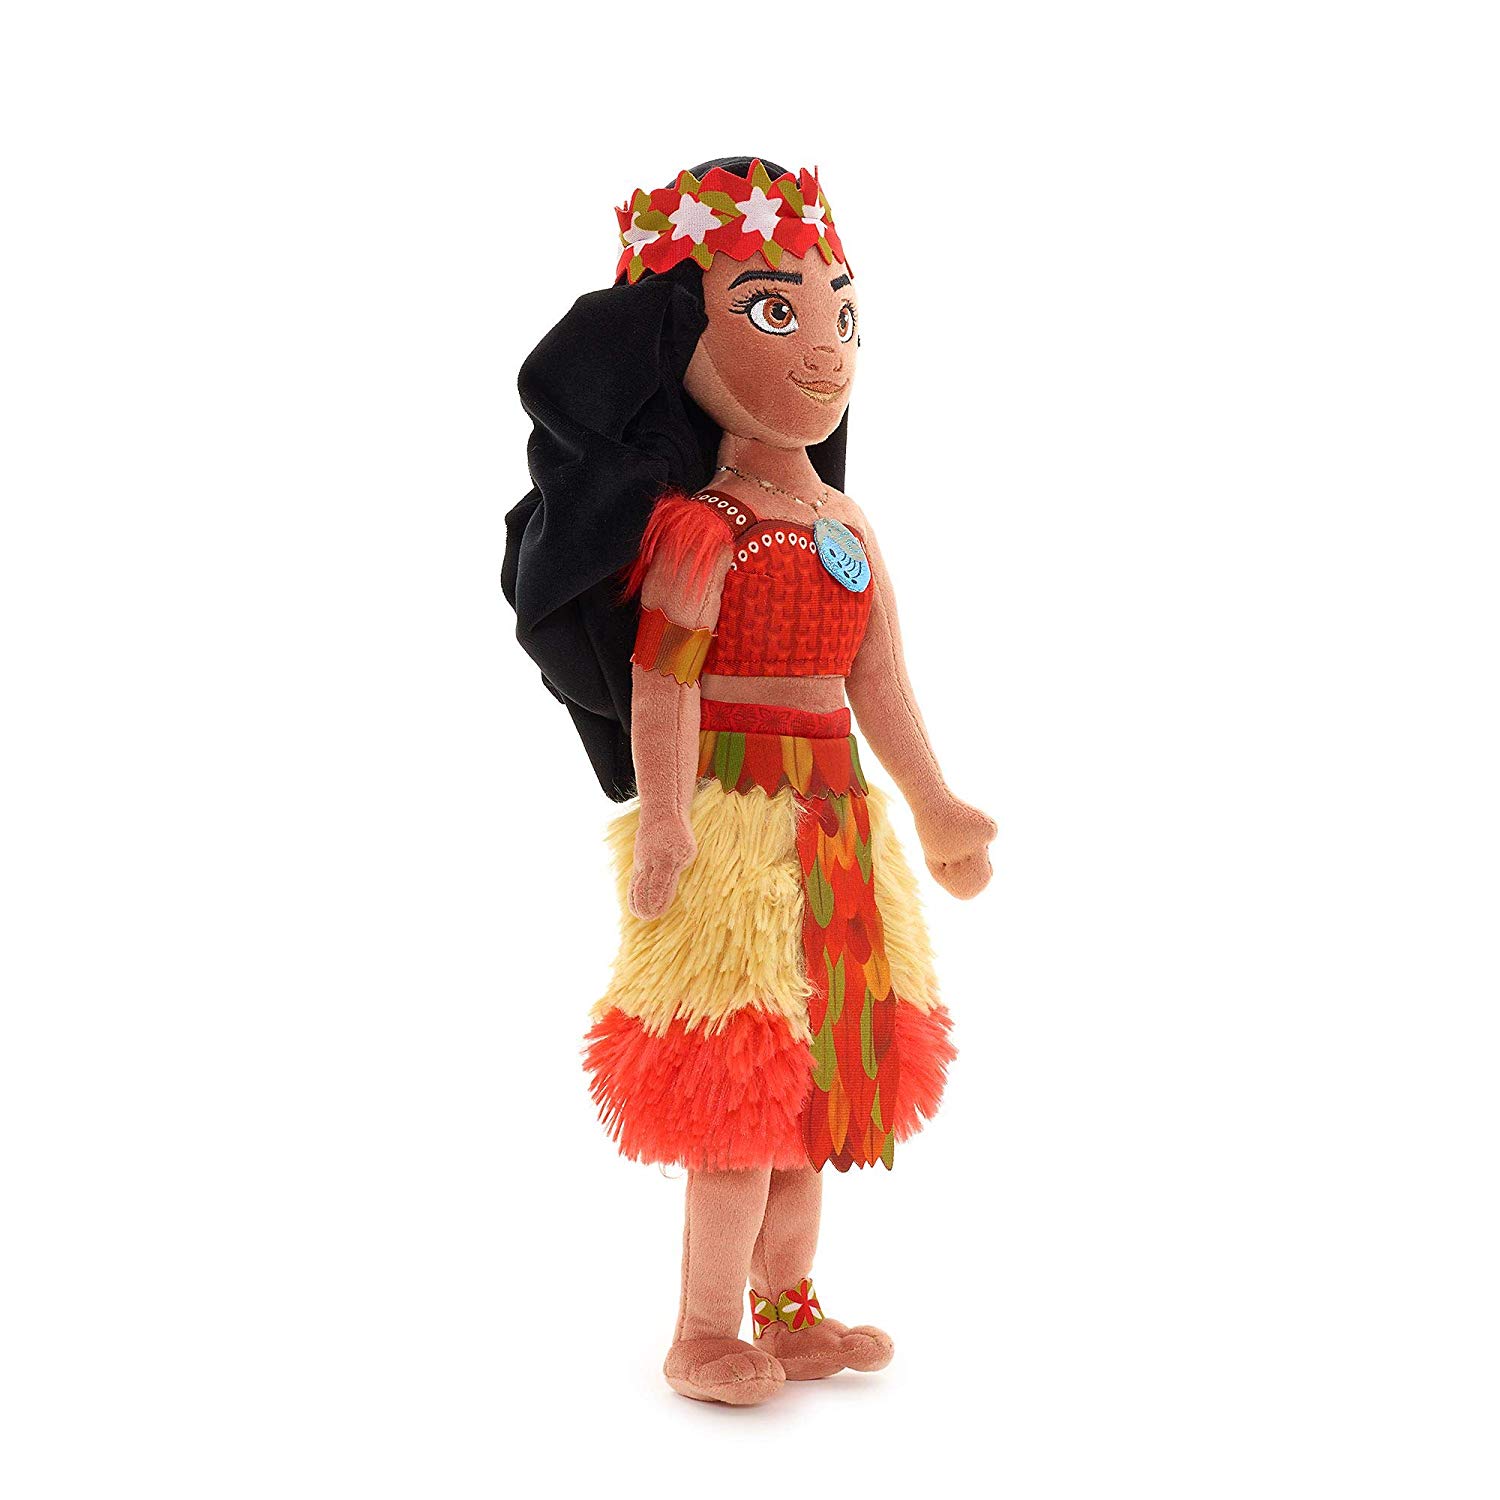 Disney Moana Ceremonial Dress, Special Ceremonial Outfit, for Ages 3 And Up  